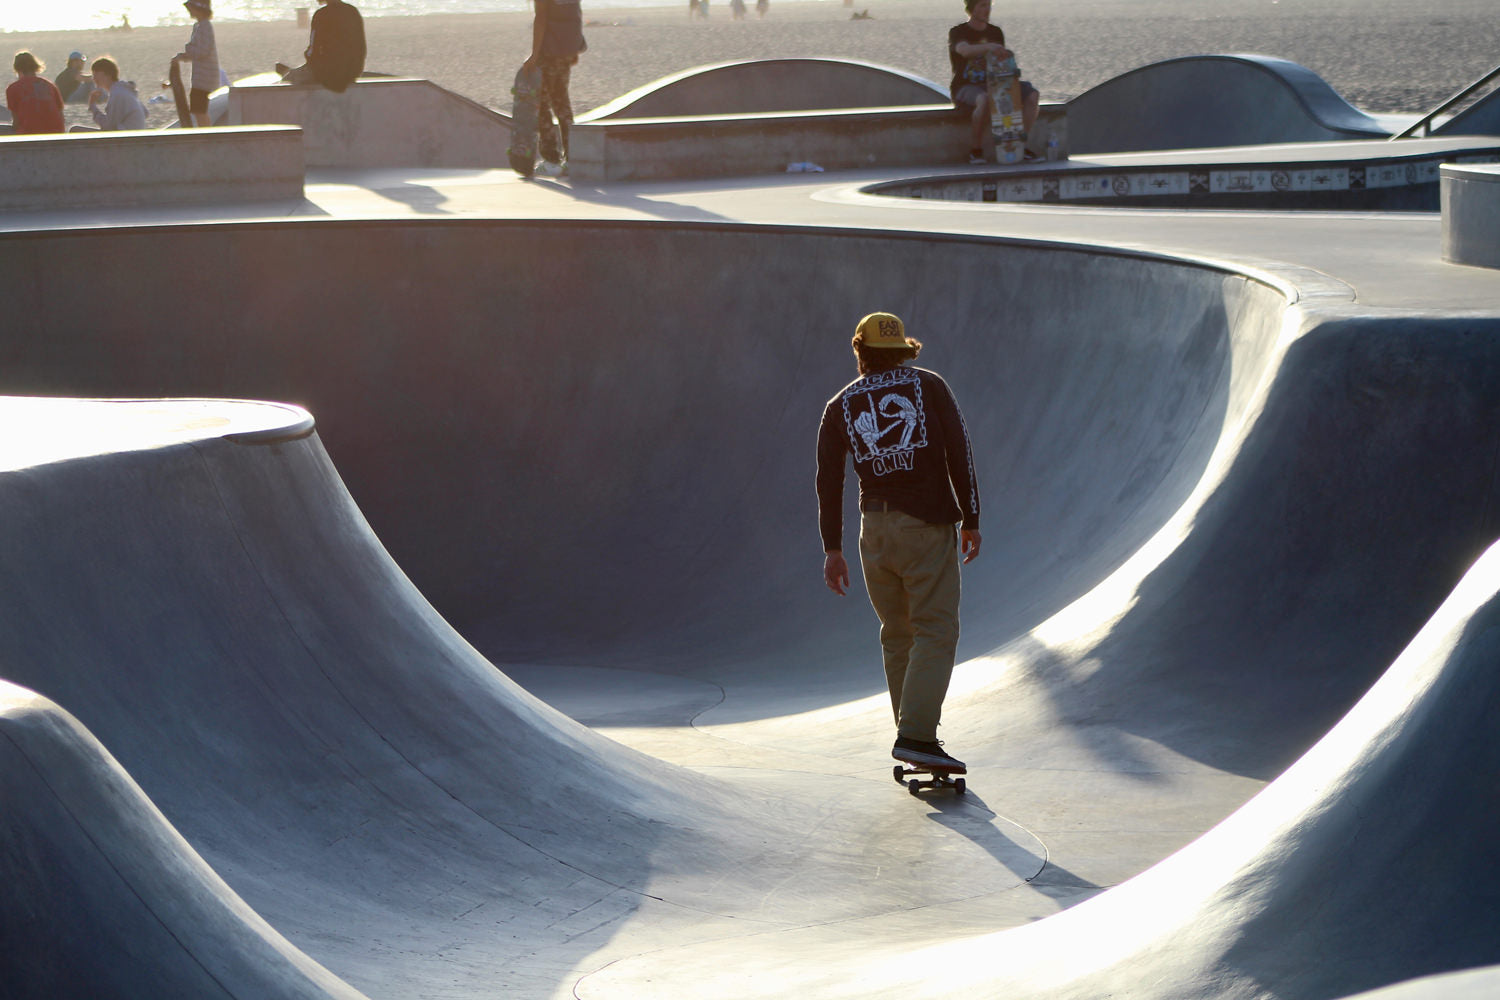 What It's Like To Skate Venice Beach